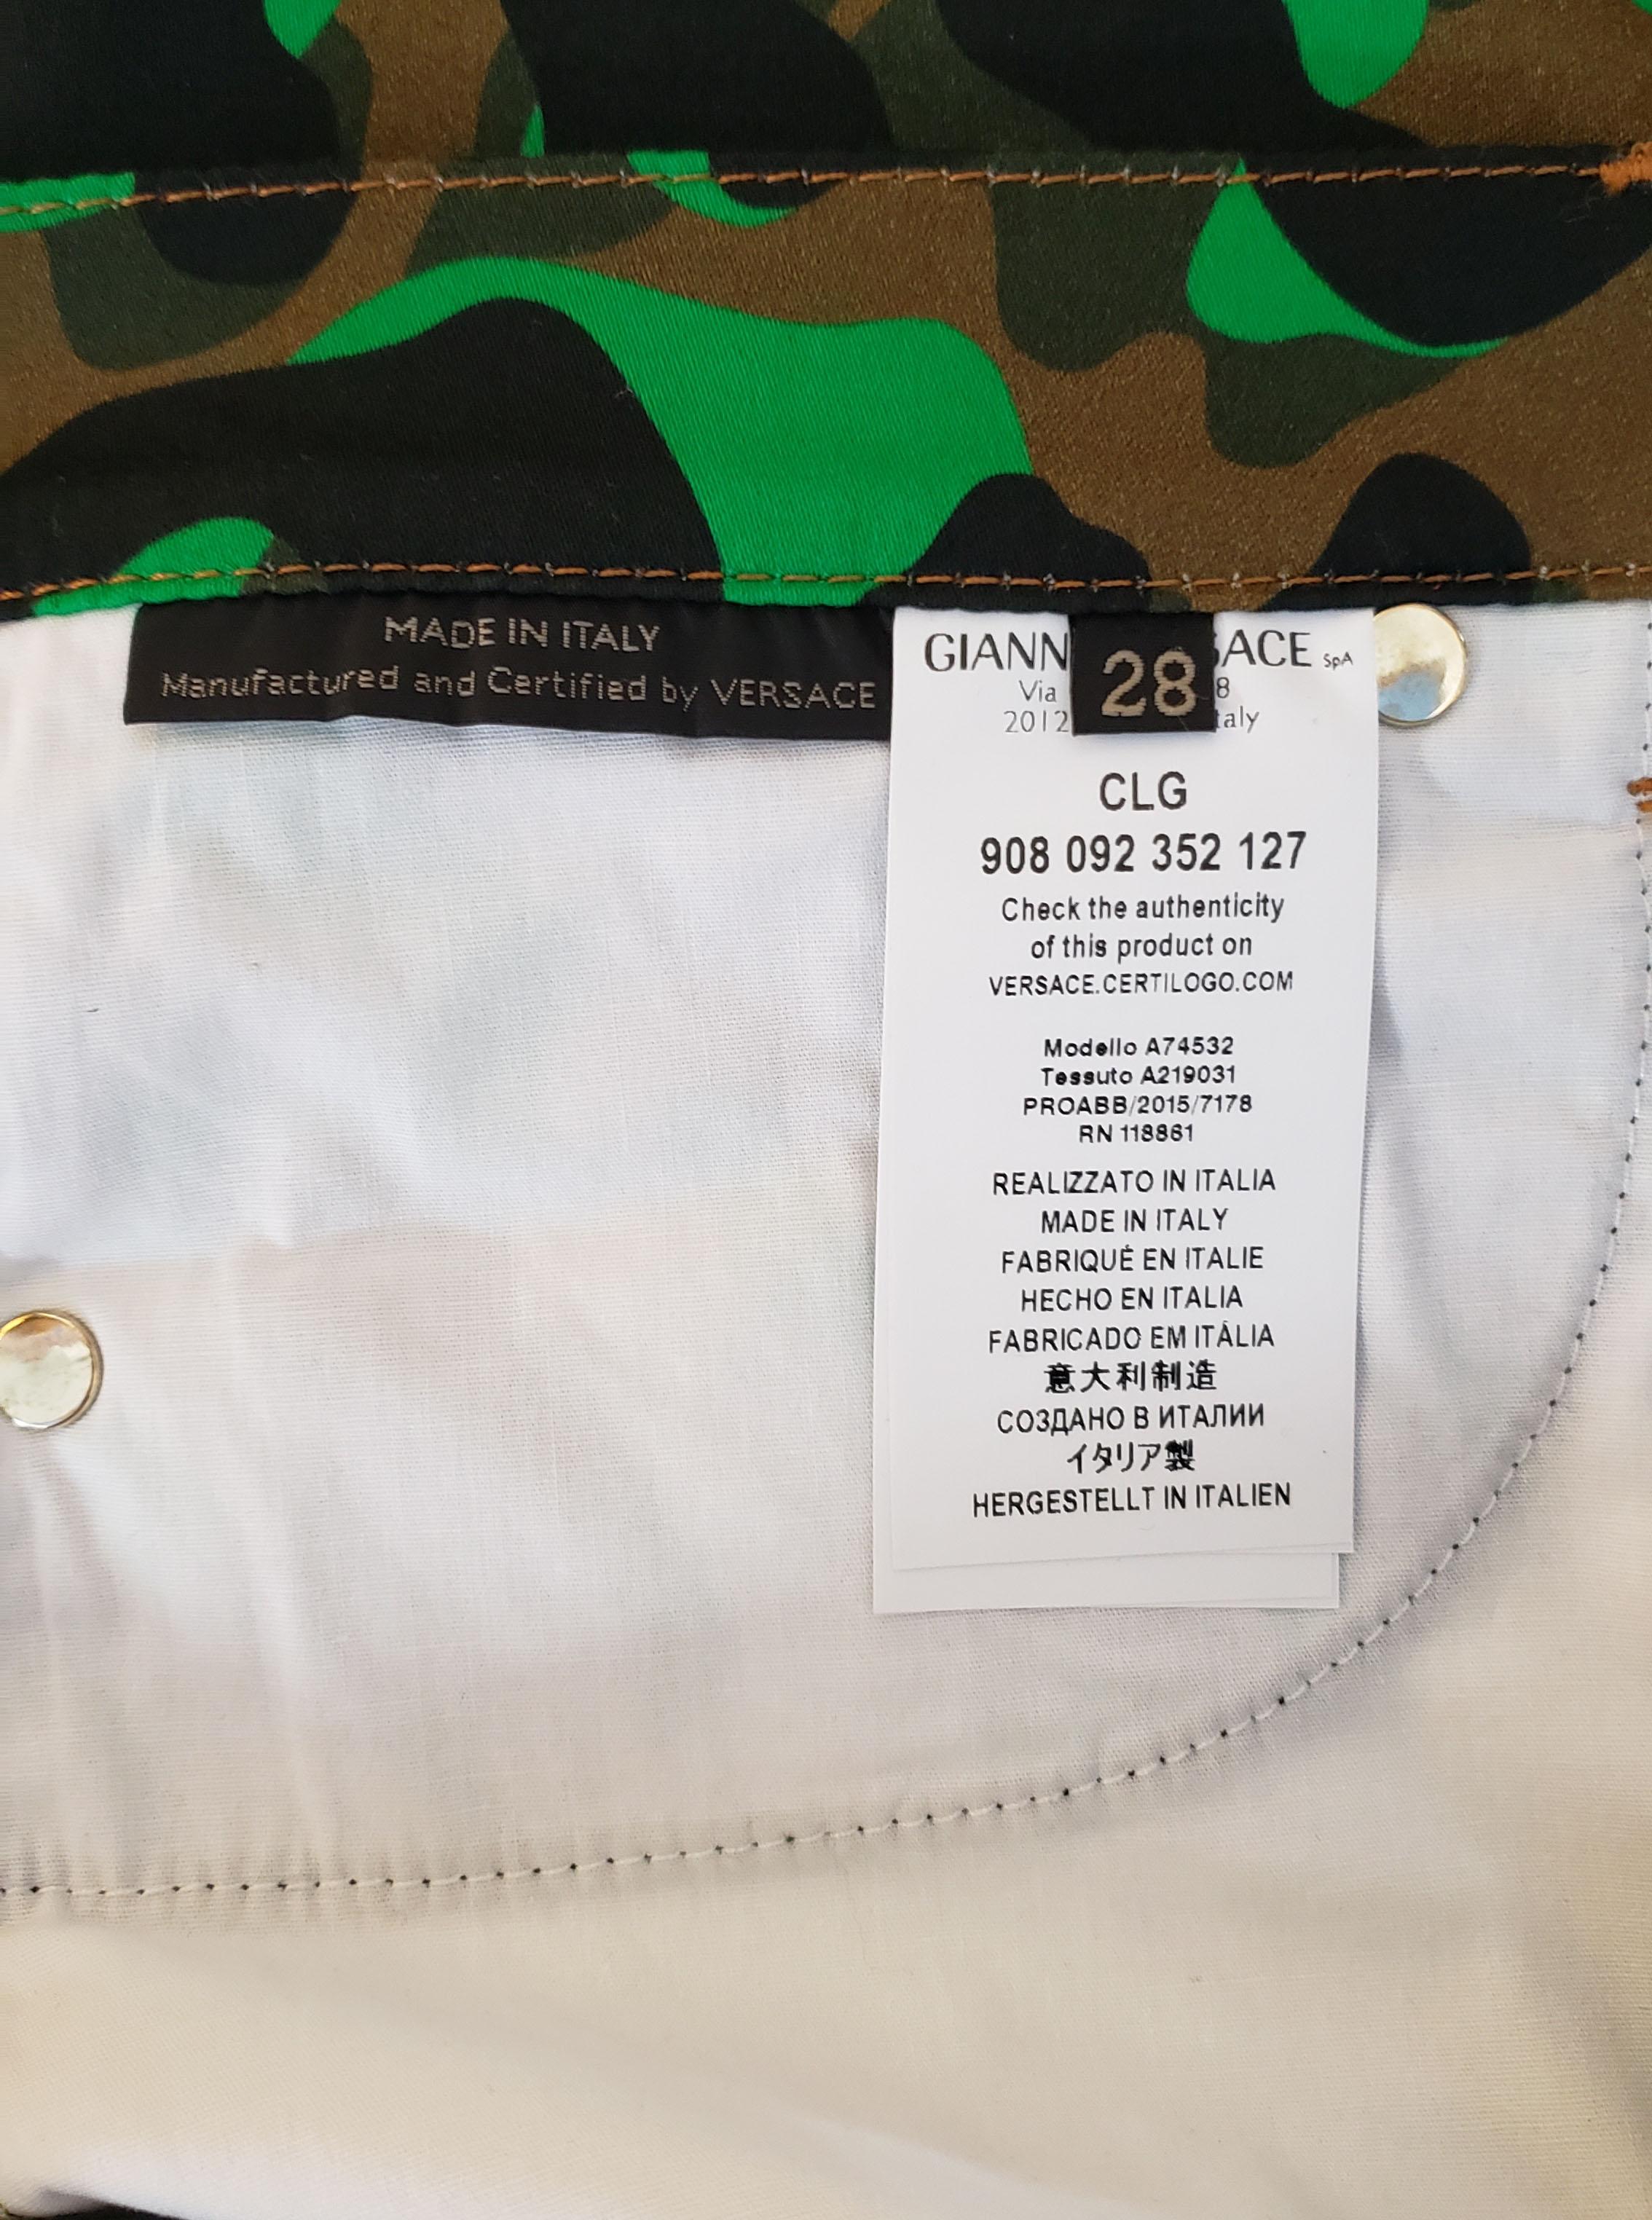 S/S 2016 VERSACE GREEN MILITARY PANTS size 28 For Sale 5